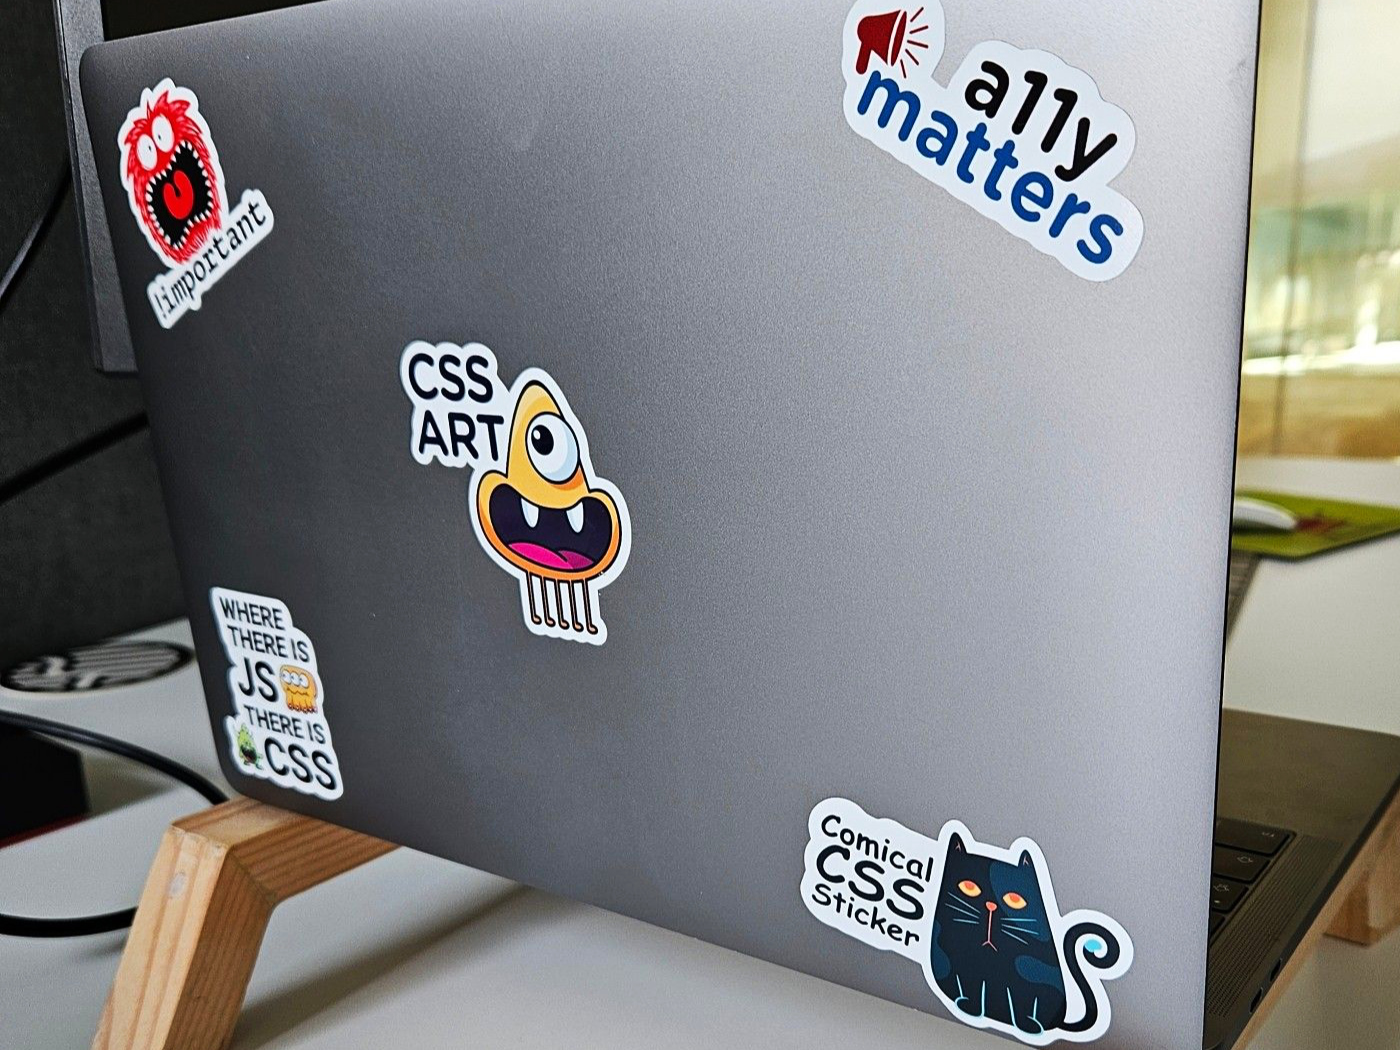 Aurélie Touchard's laptop with a number of CSS Stickers.